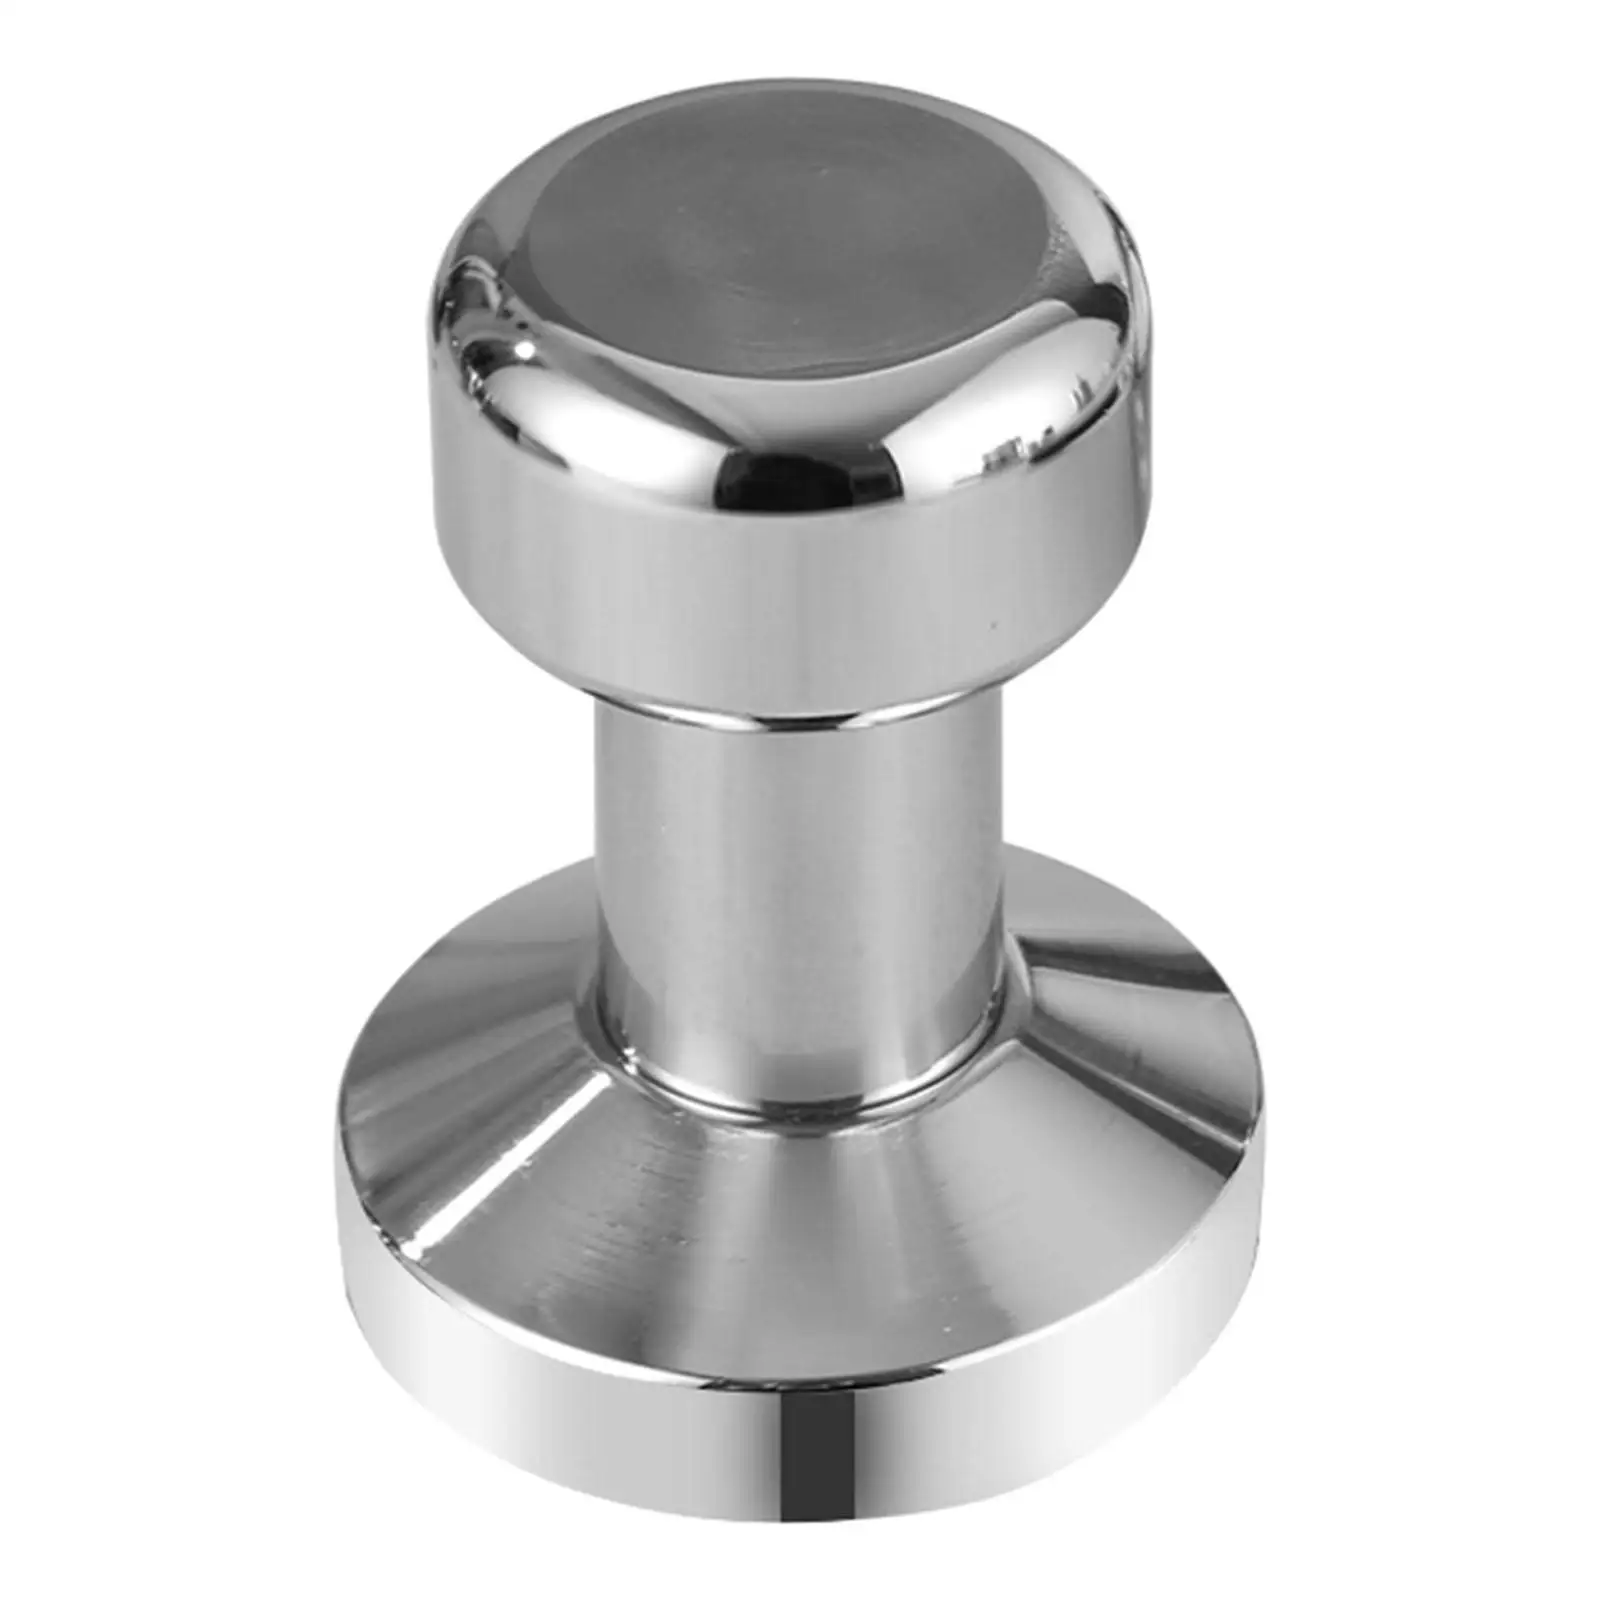 58mm Espresso Tamper Coffee Bean Press Flat Base Coffee Tamp Tool Barista Tools Coffee Distributor for Restaurants Cafe Supplies